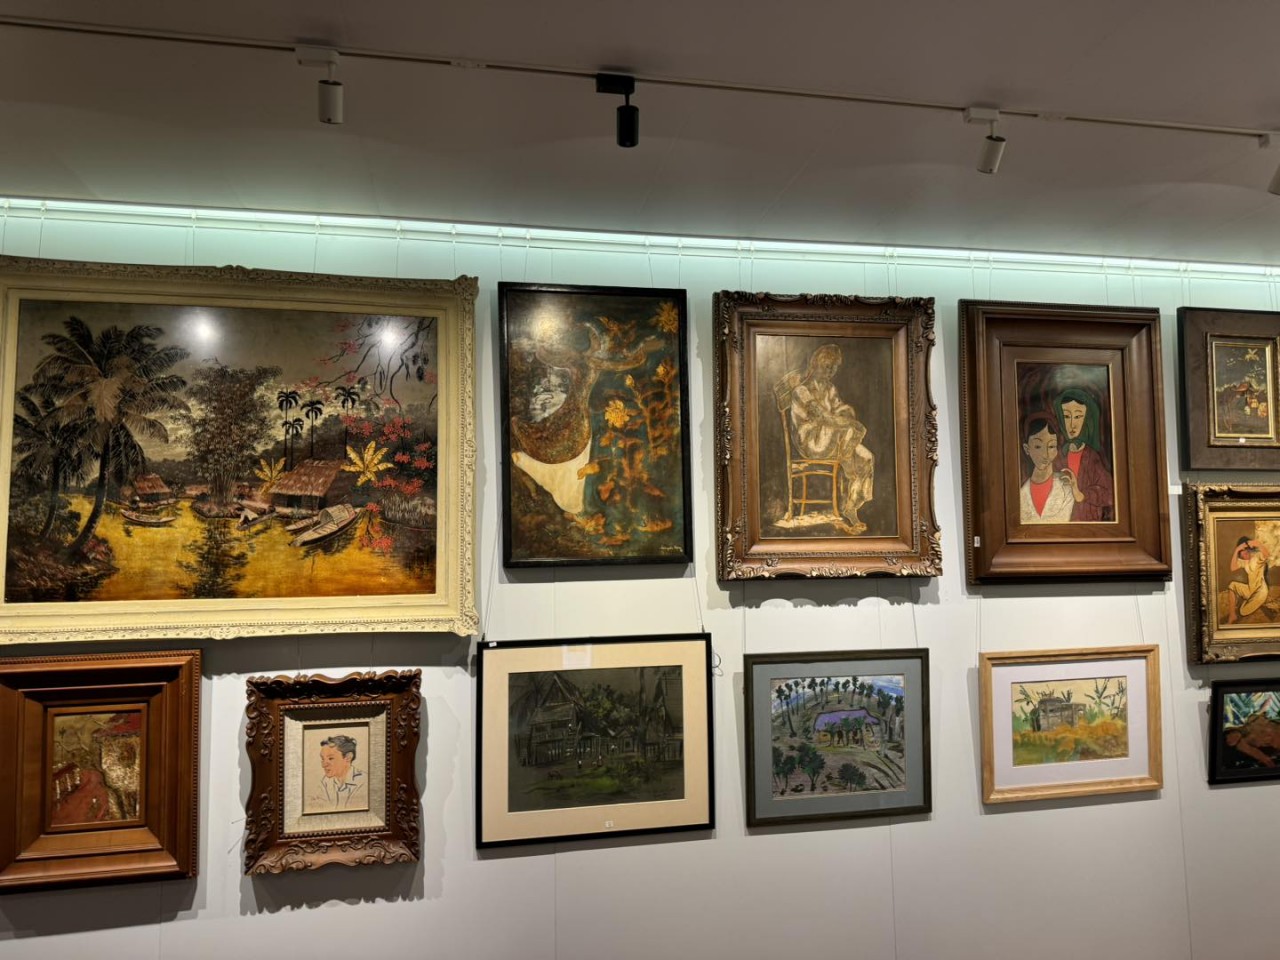 Exhibition, Auction of 221 Vietnamese Art Works of 20th Century Holds in Hanoi